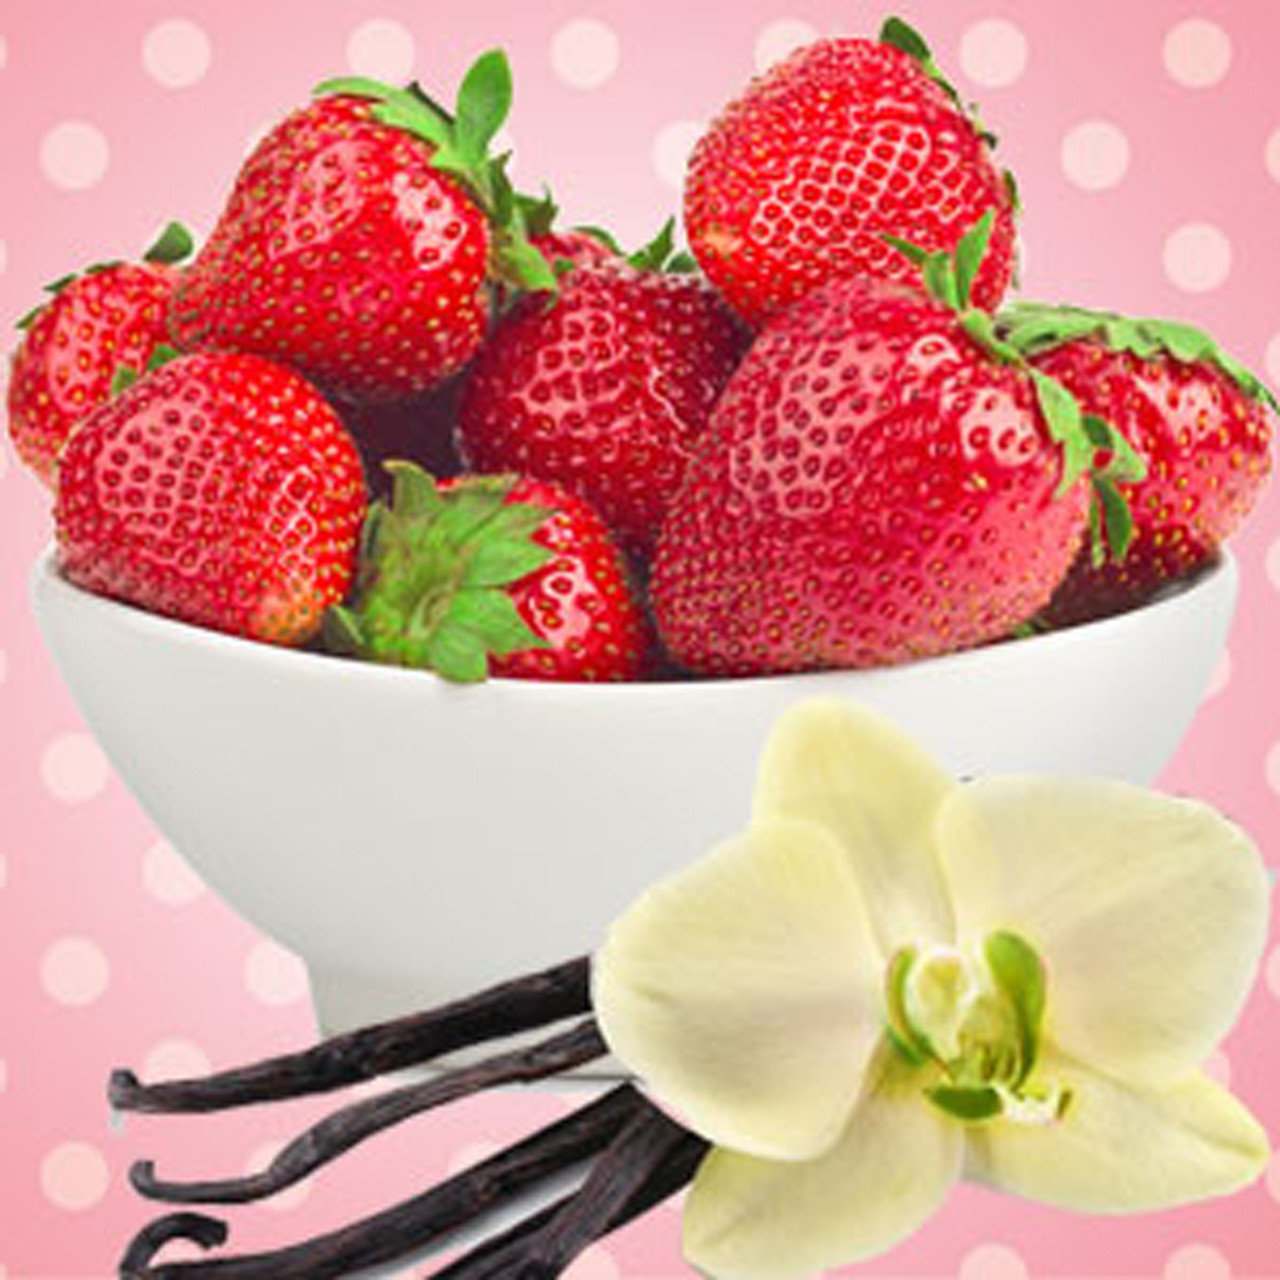 Strawberry Passion Fragrance Oil